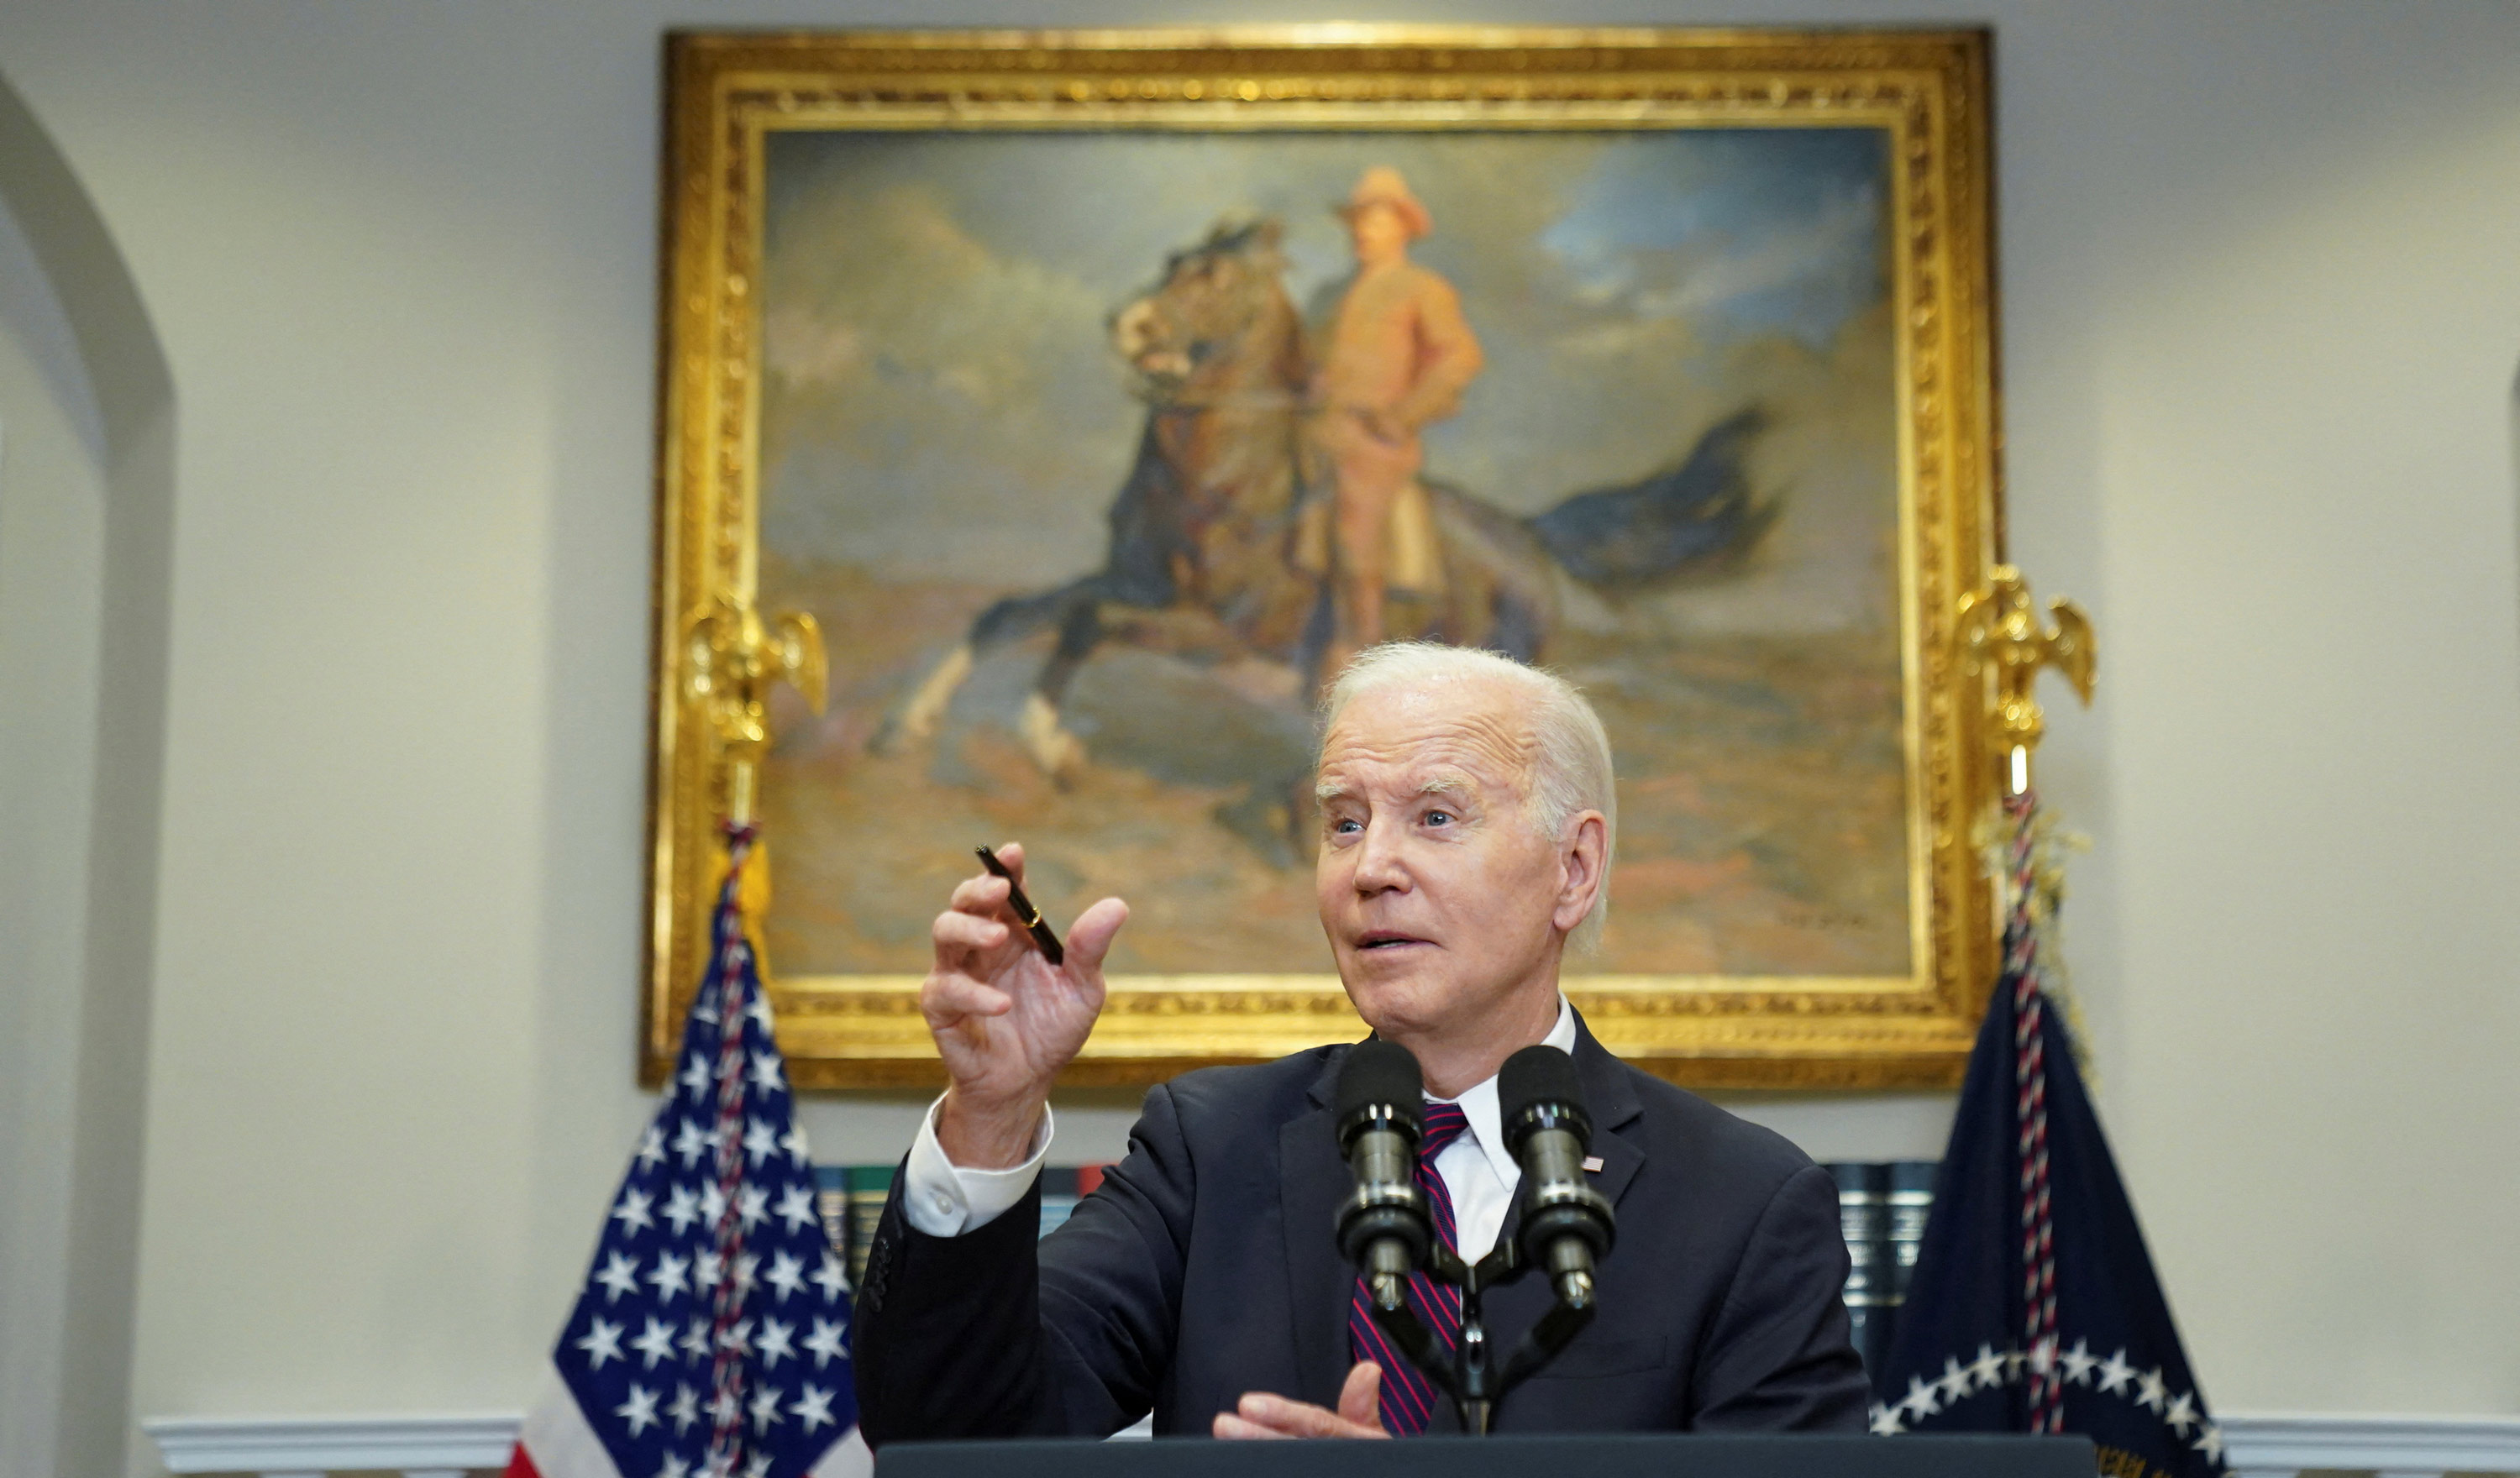 President Joe Biden answers questions from reporters in the Roosevelt Room after holding debt limit talks with House Speaker Kevin McCarthy (R-CA), Senate Republican Leader Mitch McConnell (R-KY) and Democratic congressional leaders at the White House in on May 9 in Washington, DC.